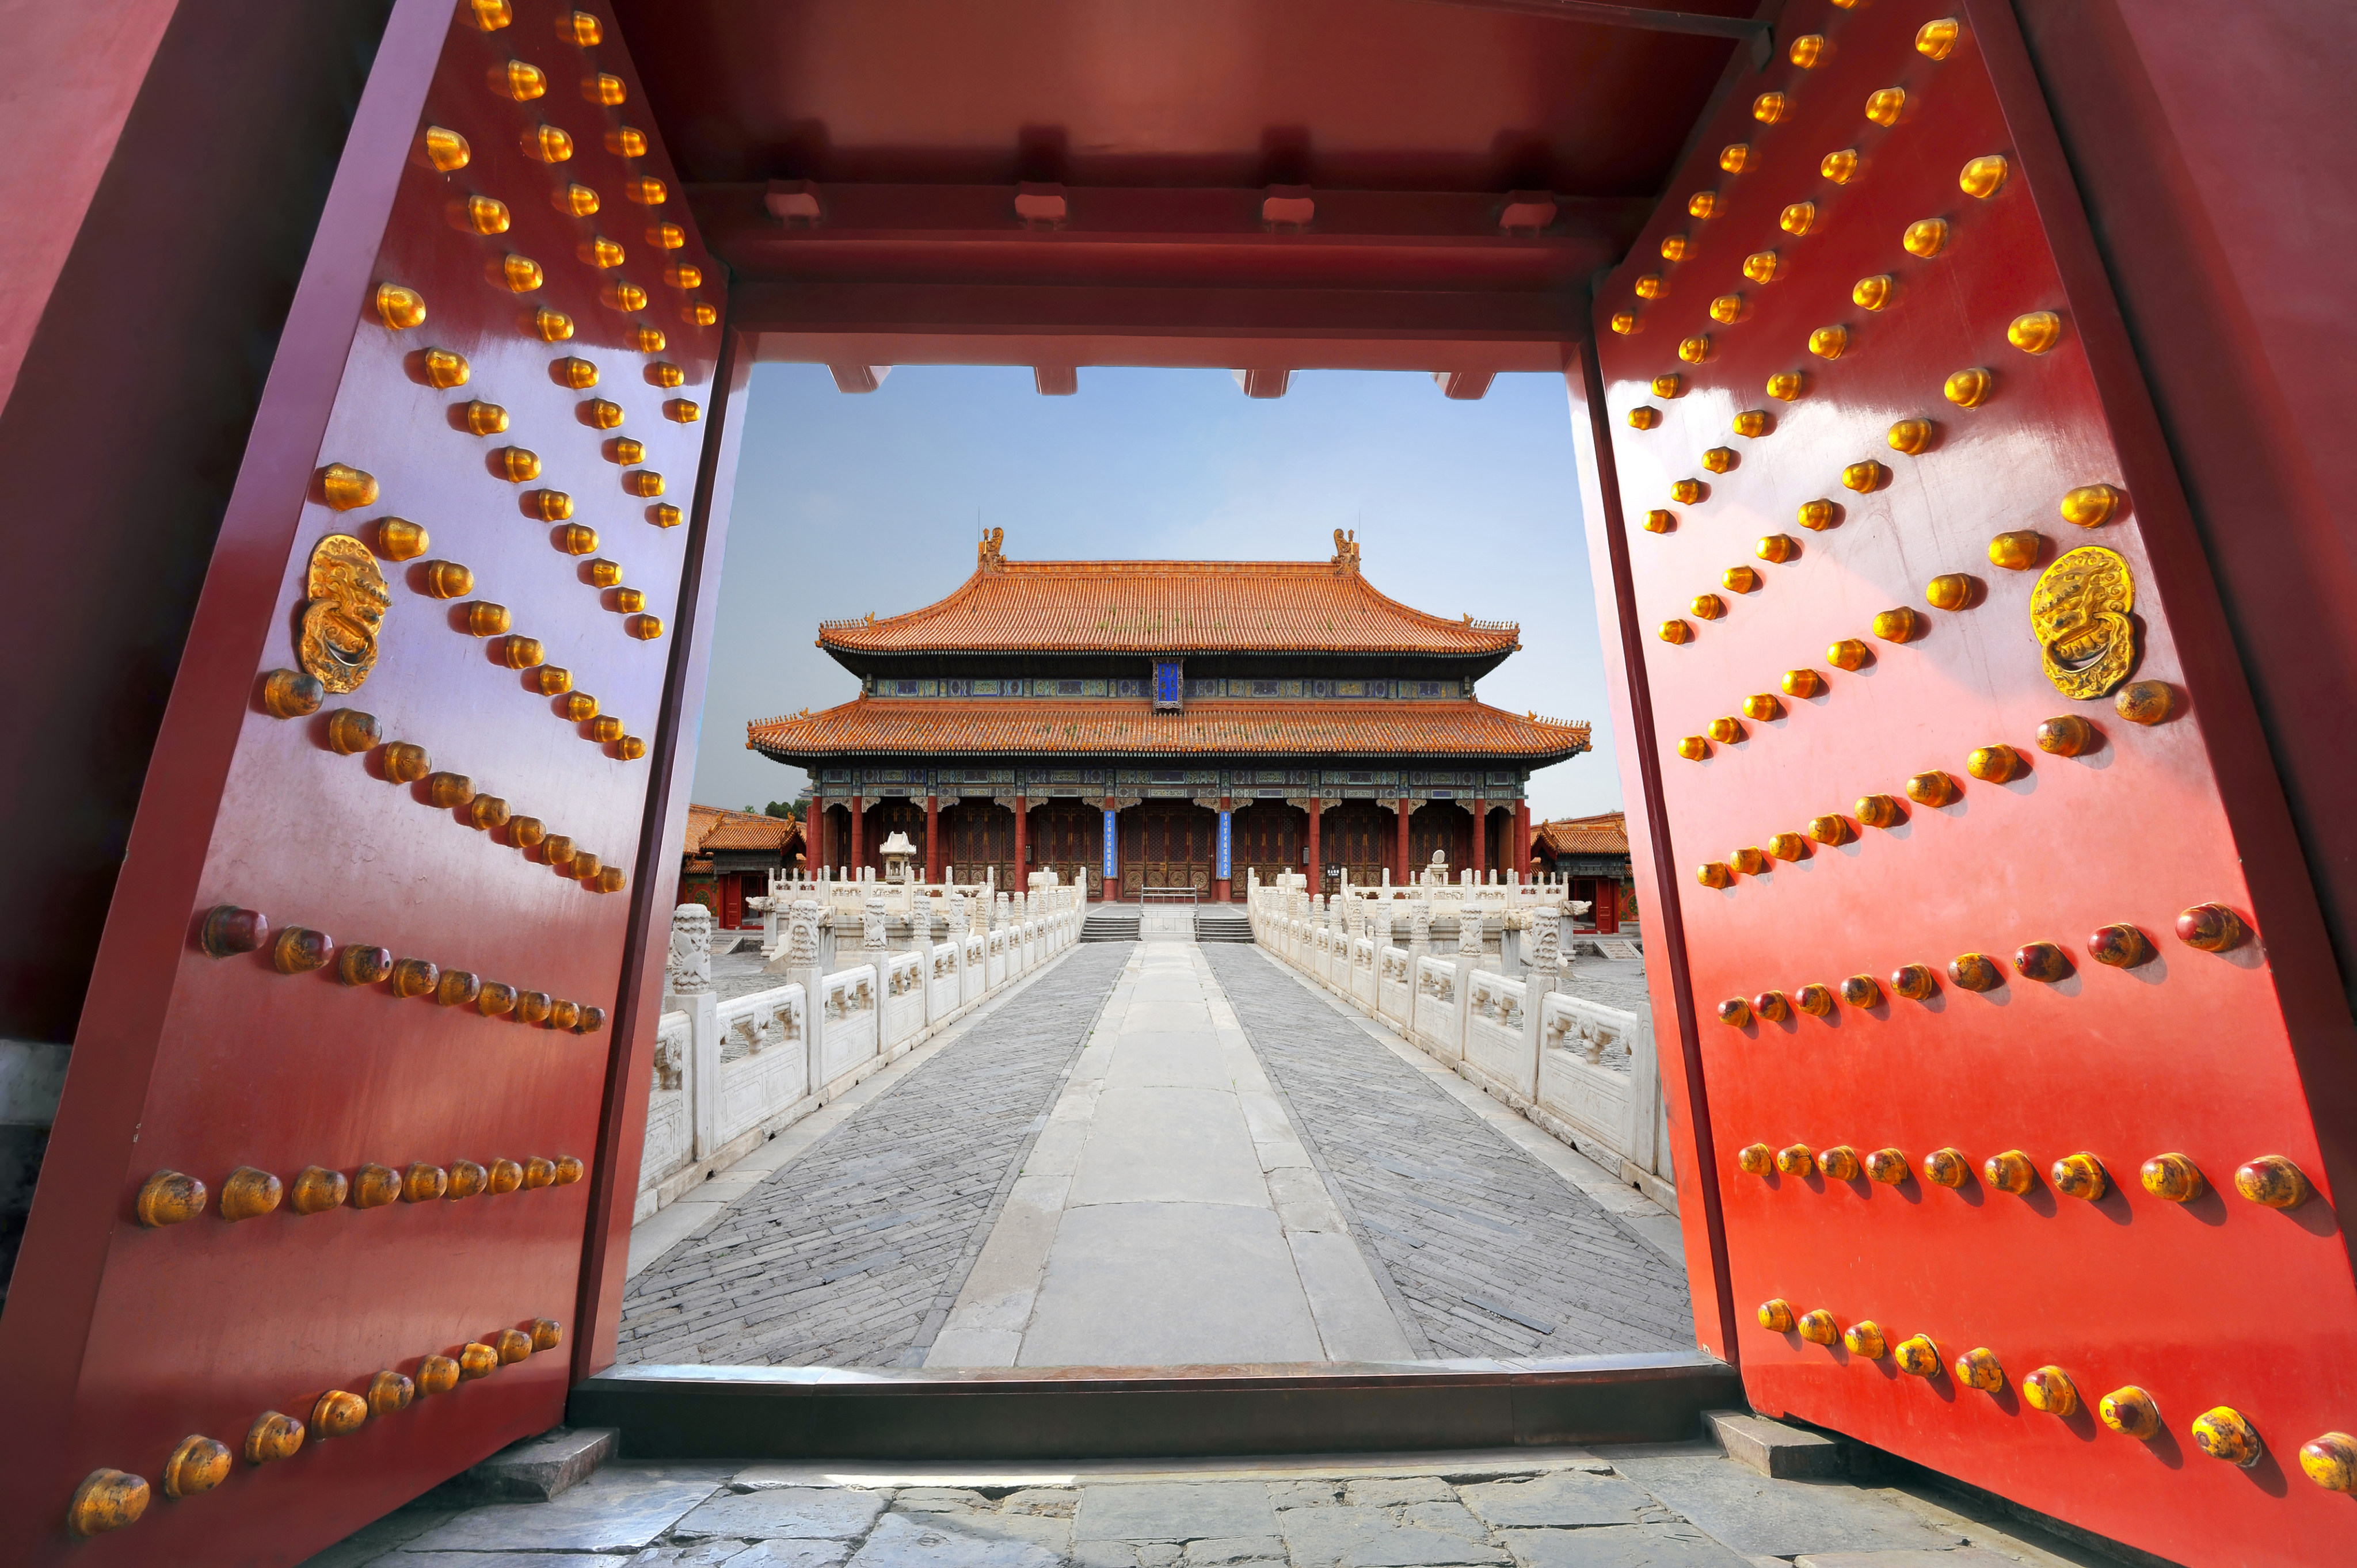 The Forbidden City, now the Palace Museum, was China’s imperial palace during the Ming and Qing dynasties. Photo: Shutterstock